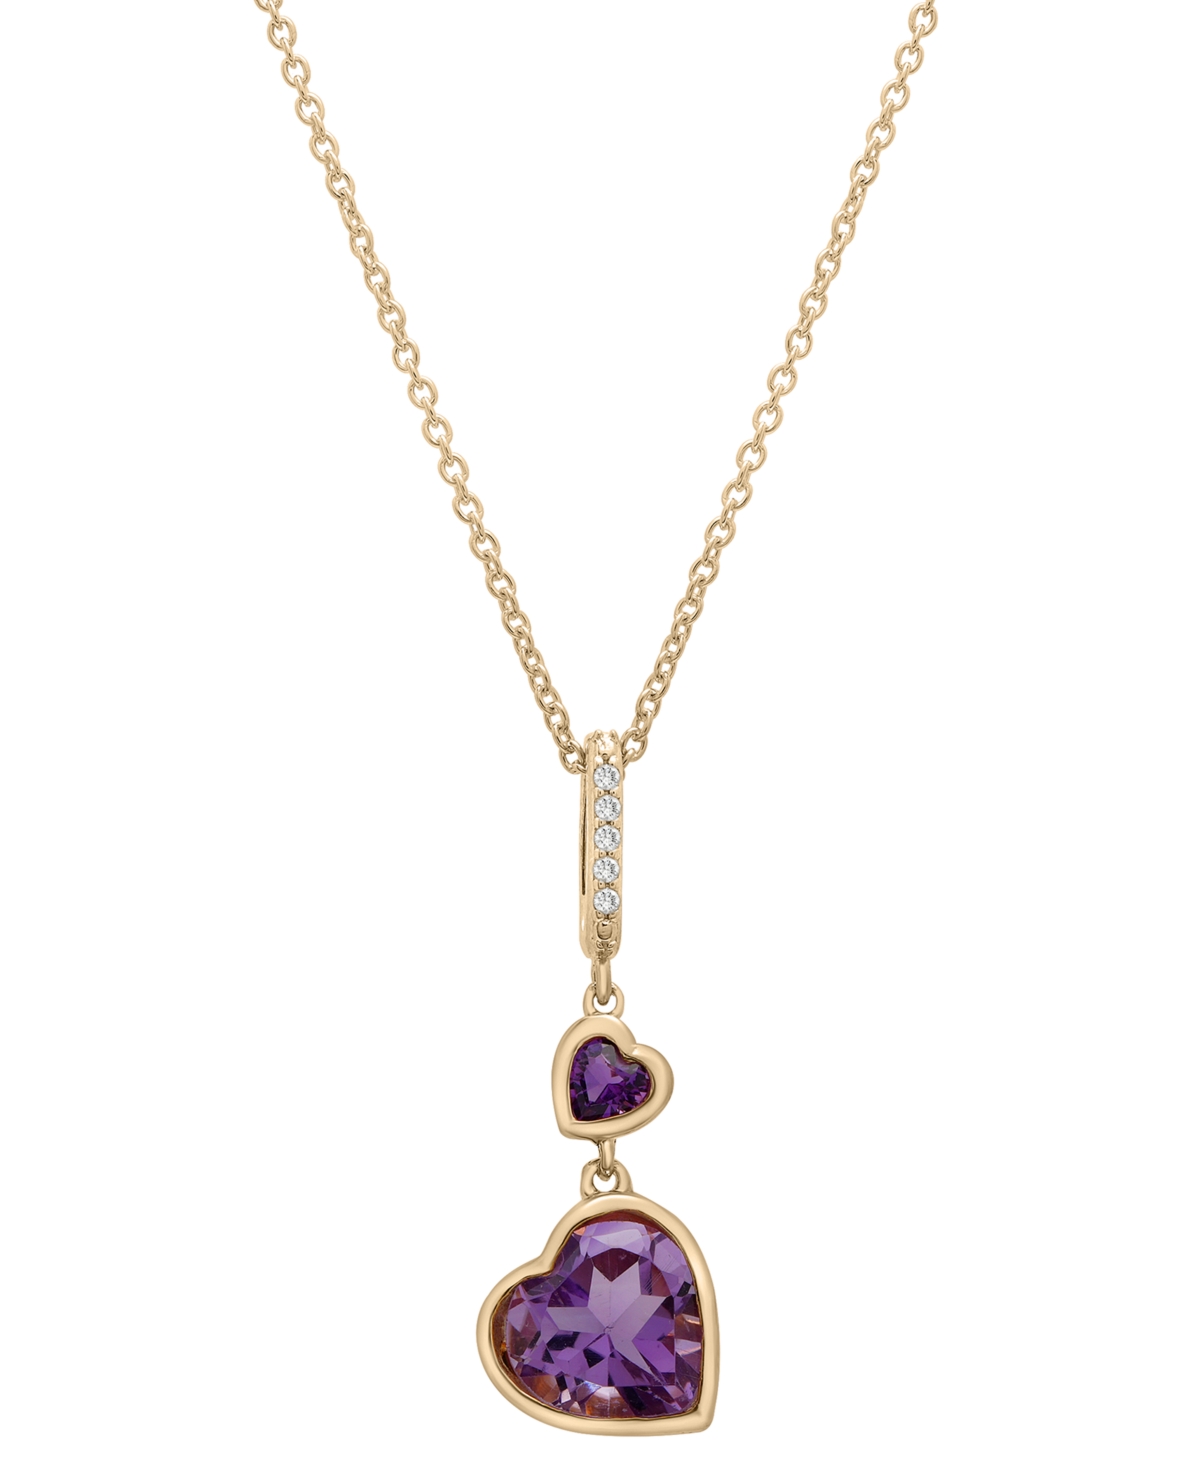 Amethyst (1/5 ct. t.w.), Rose de France Amethyst (1-1/4 ct. t.w.), & Diamond Accent Double Heart 18" Pendant Necklace in 14k Gold-Plated Sterling Silv